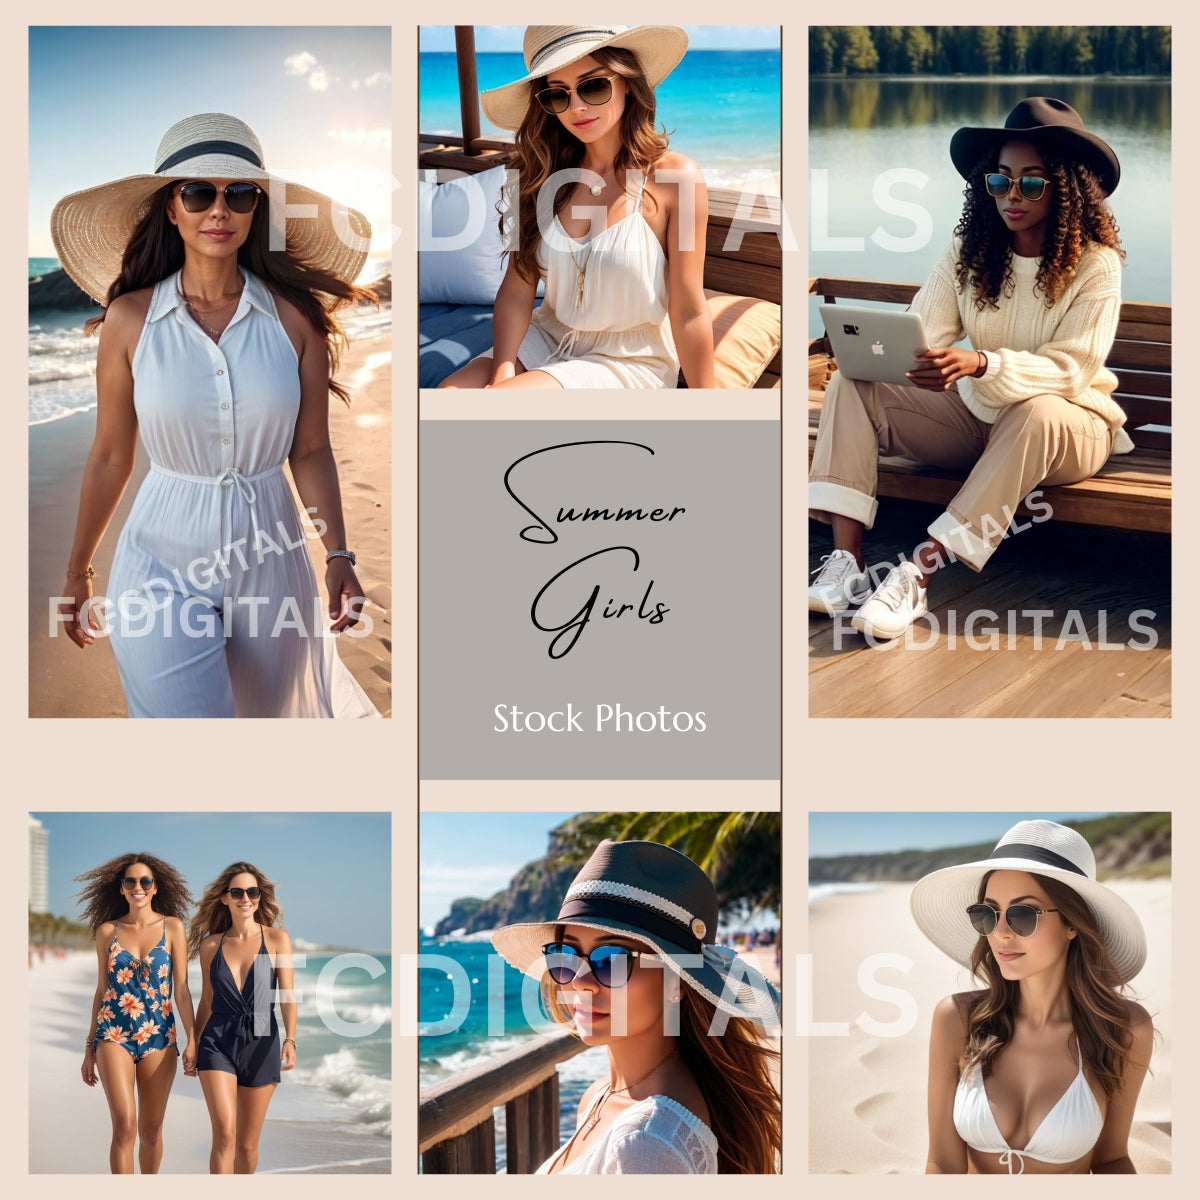 Summer Girls Stock Photos with Commerical Use, Travel Stock Photos